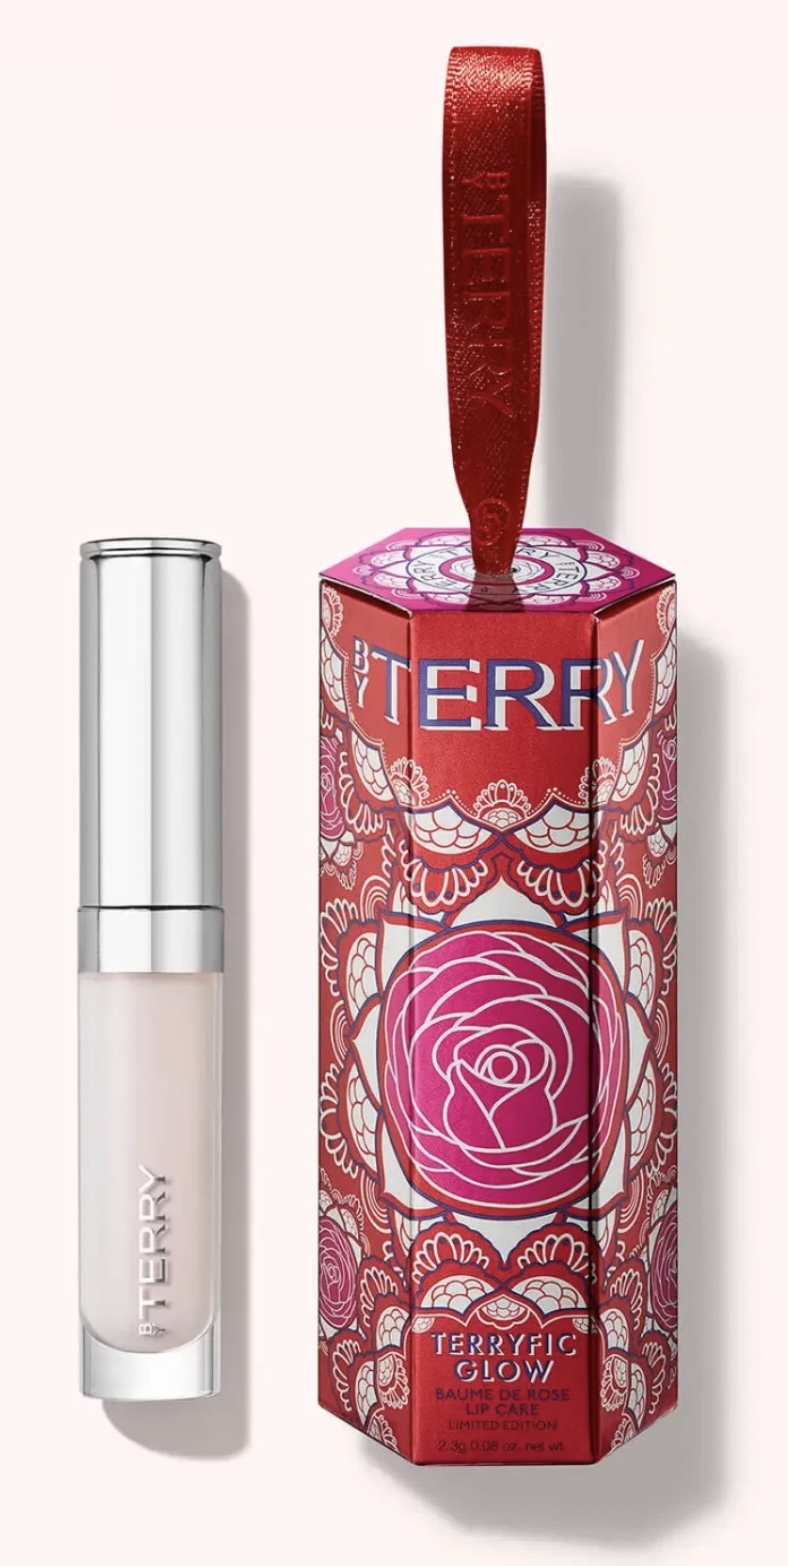 Collection Noël 2022 By Terry Terryfic Glow Baume De Rose Lip Care Set